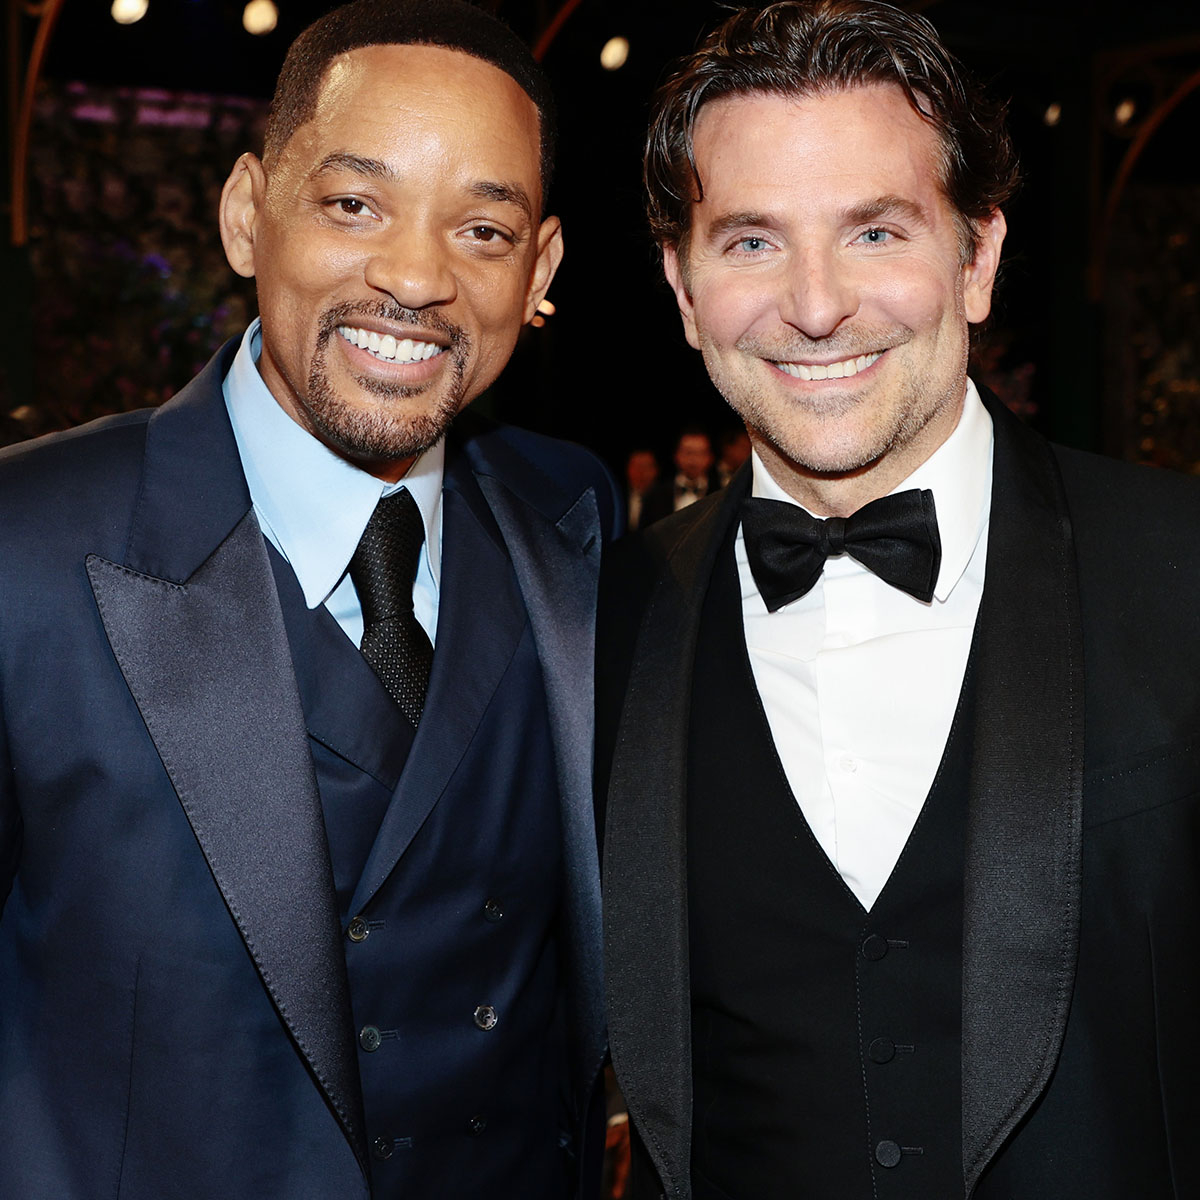 Will Smith Appears to Wipe Tears as He Talks to Bradley Cooper